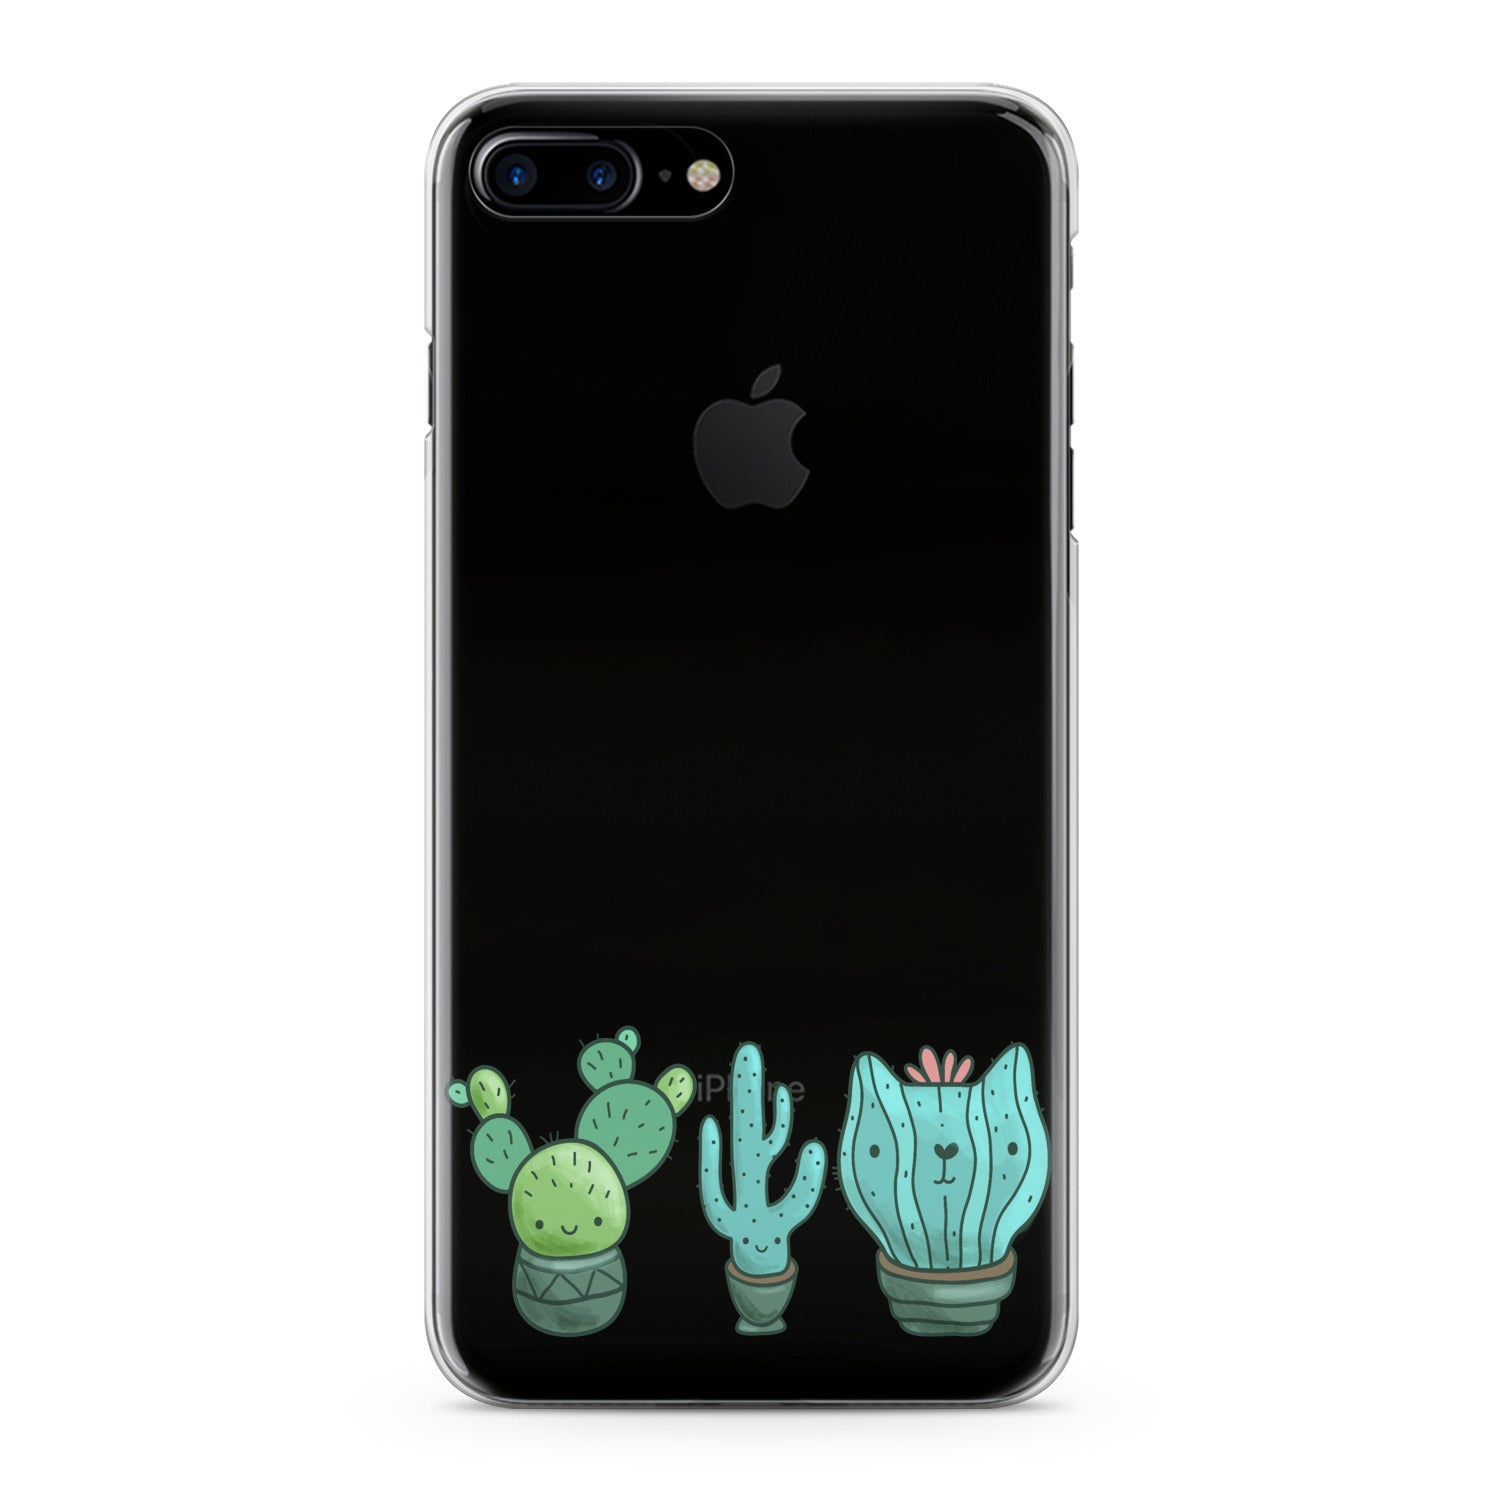 Lex Altern Kawaii Cacti Cat Phone Case for your iPhone & Android phone.